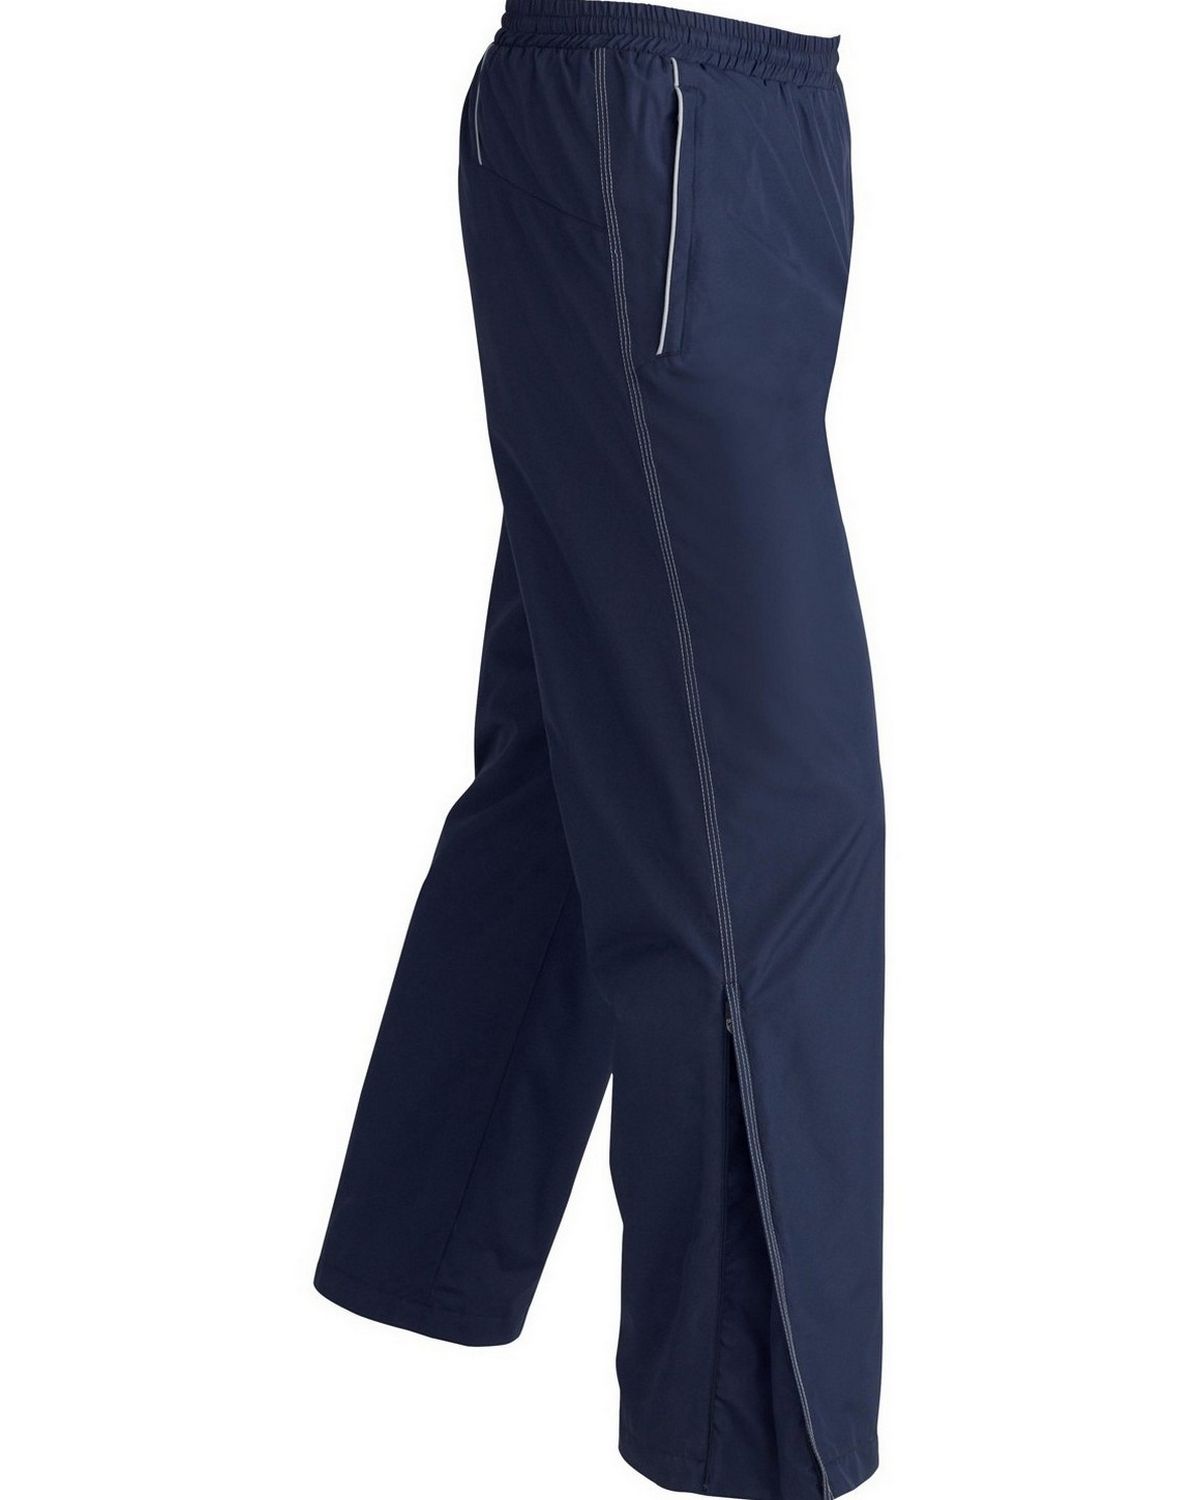 North End 88163 Mens Active Lightweight Pants